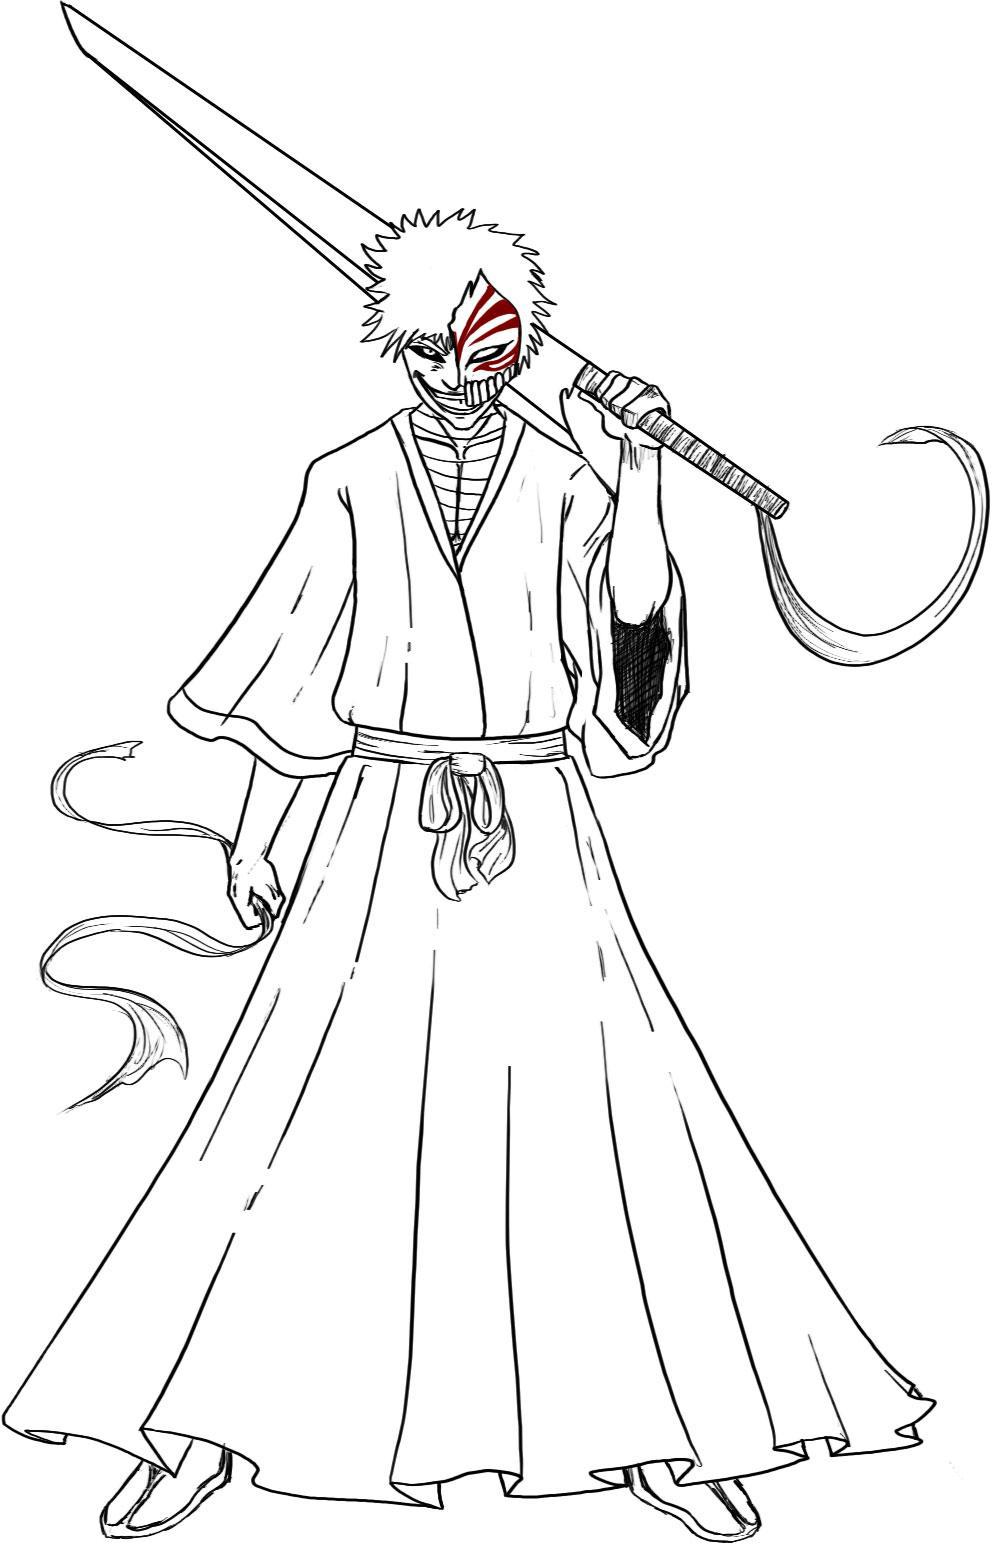 Bleach Coloring Page 5